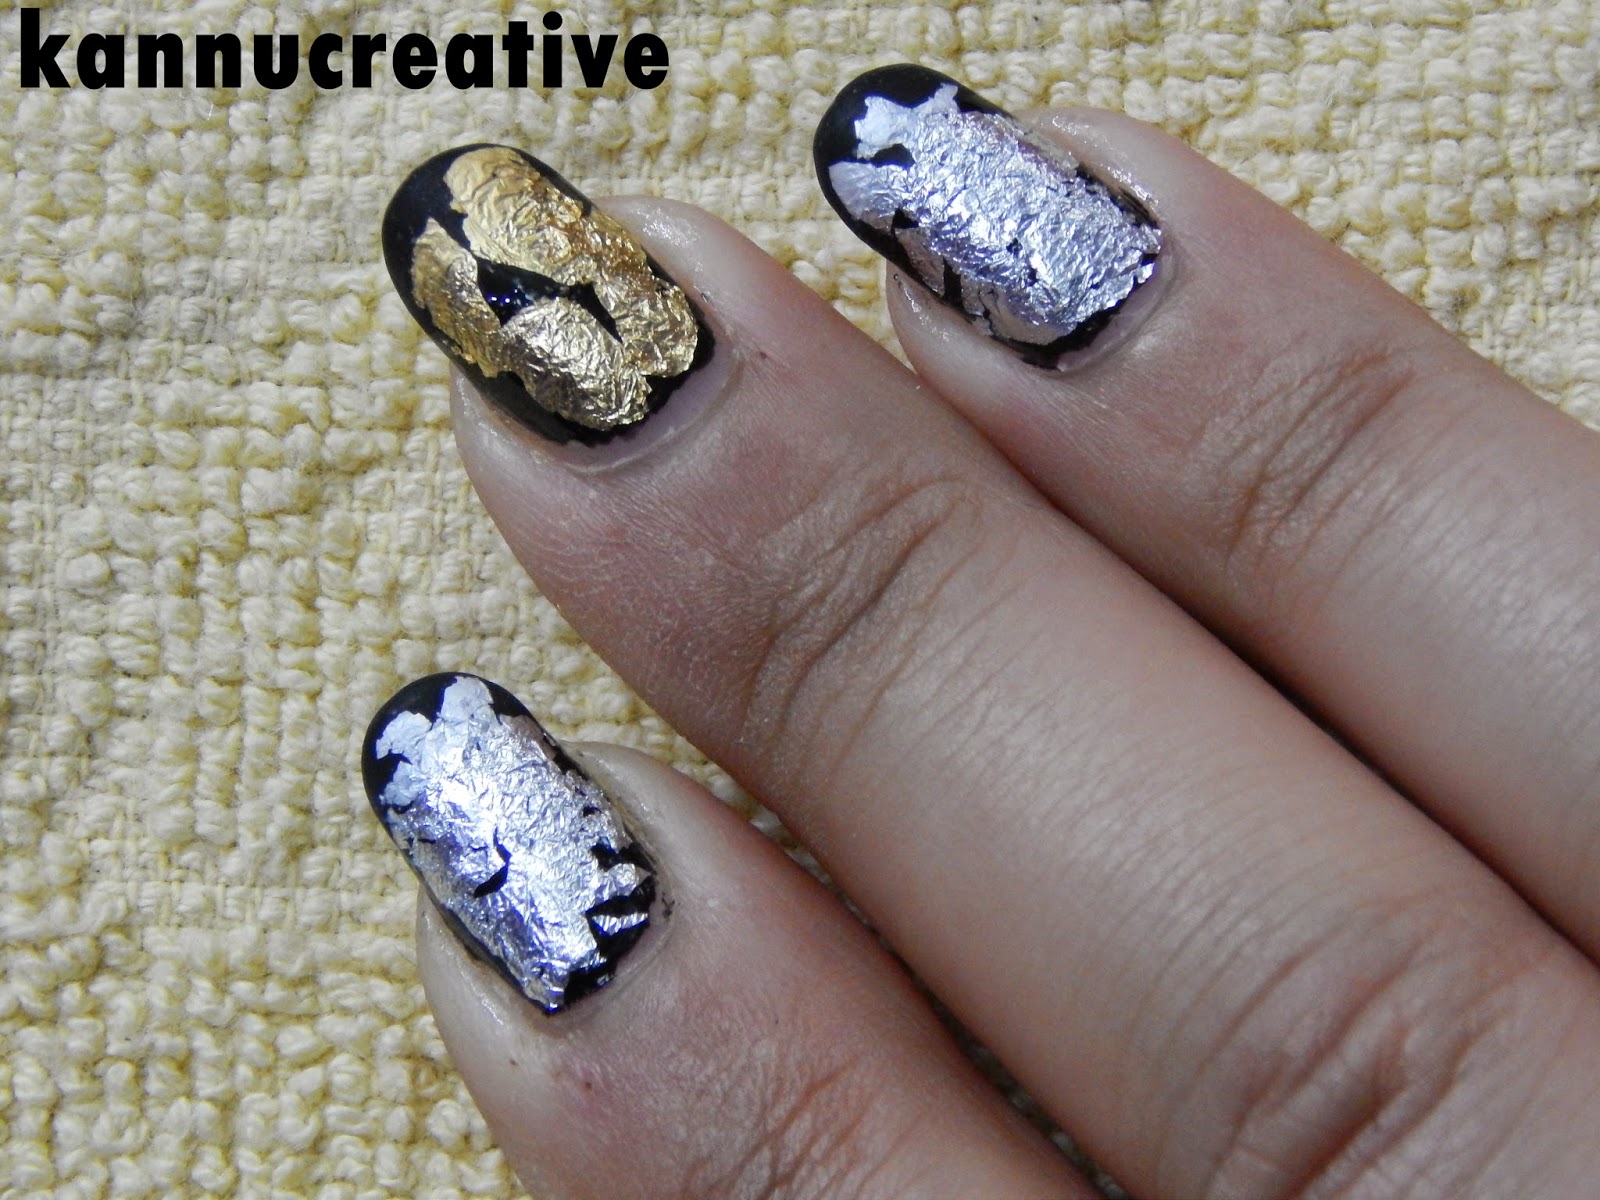 7. Foil Nail Art at Home - wide 9